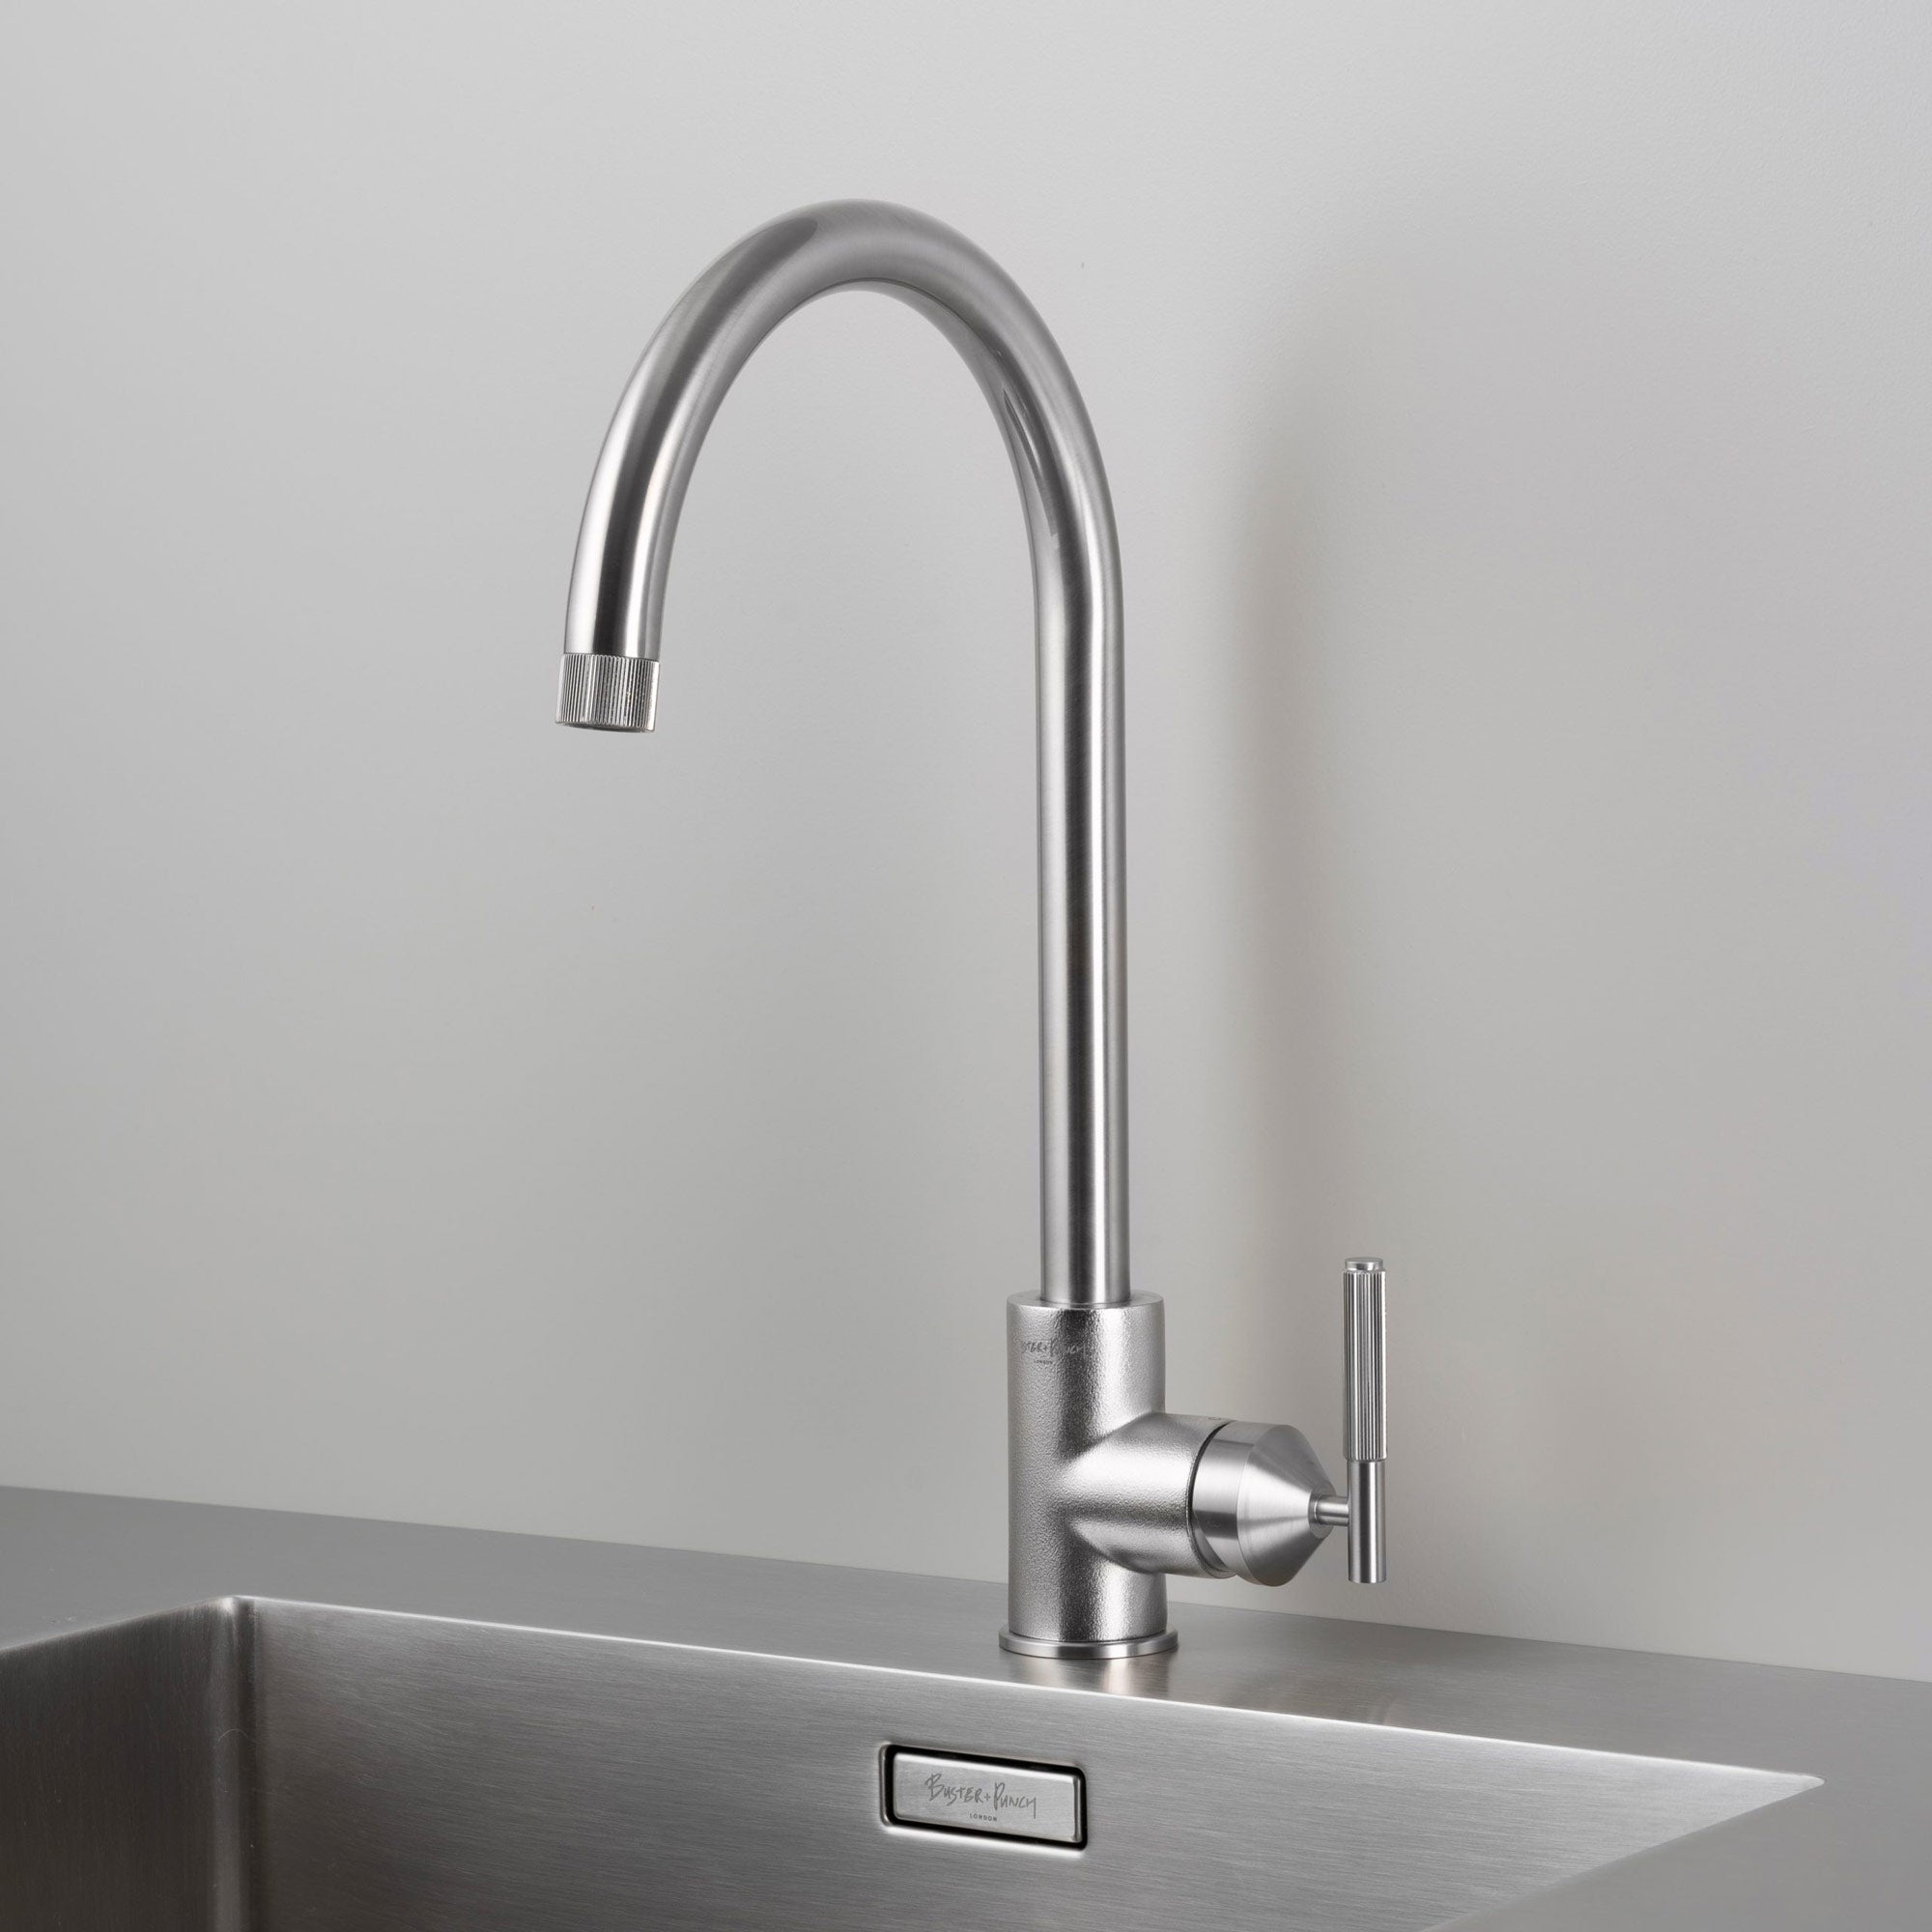 Buster + Punch Kitchen Faucet / Mixer / Linear Faucet Buster + Punch Steel  